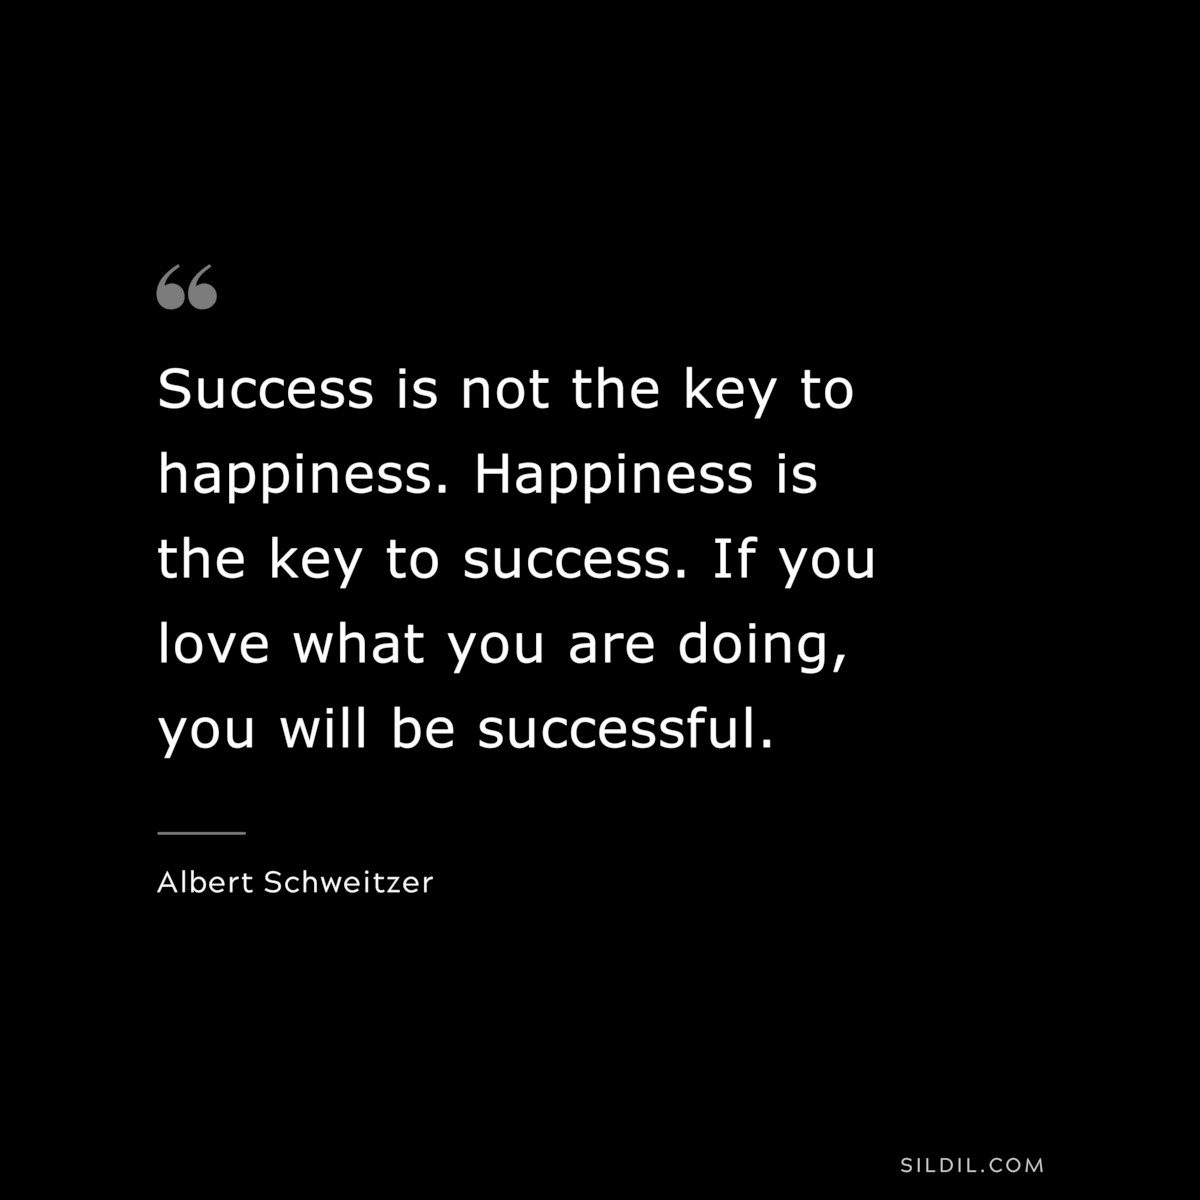 Success is not the key to happiness. Happiness is the key to success. If you love what you are doing, you will be successful. ― Albert Schweitzer